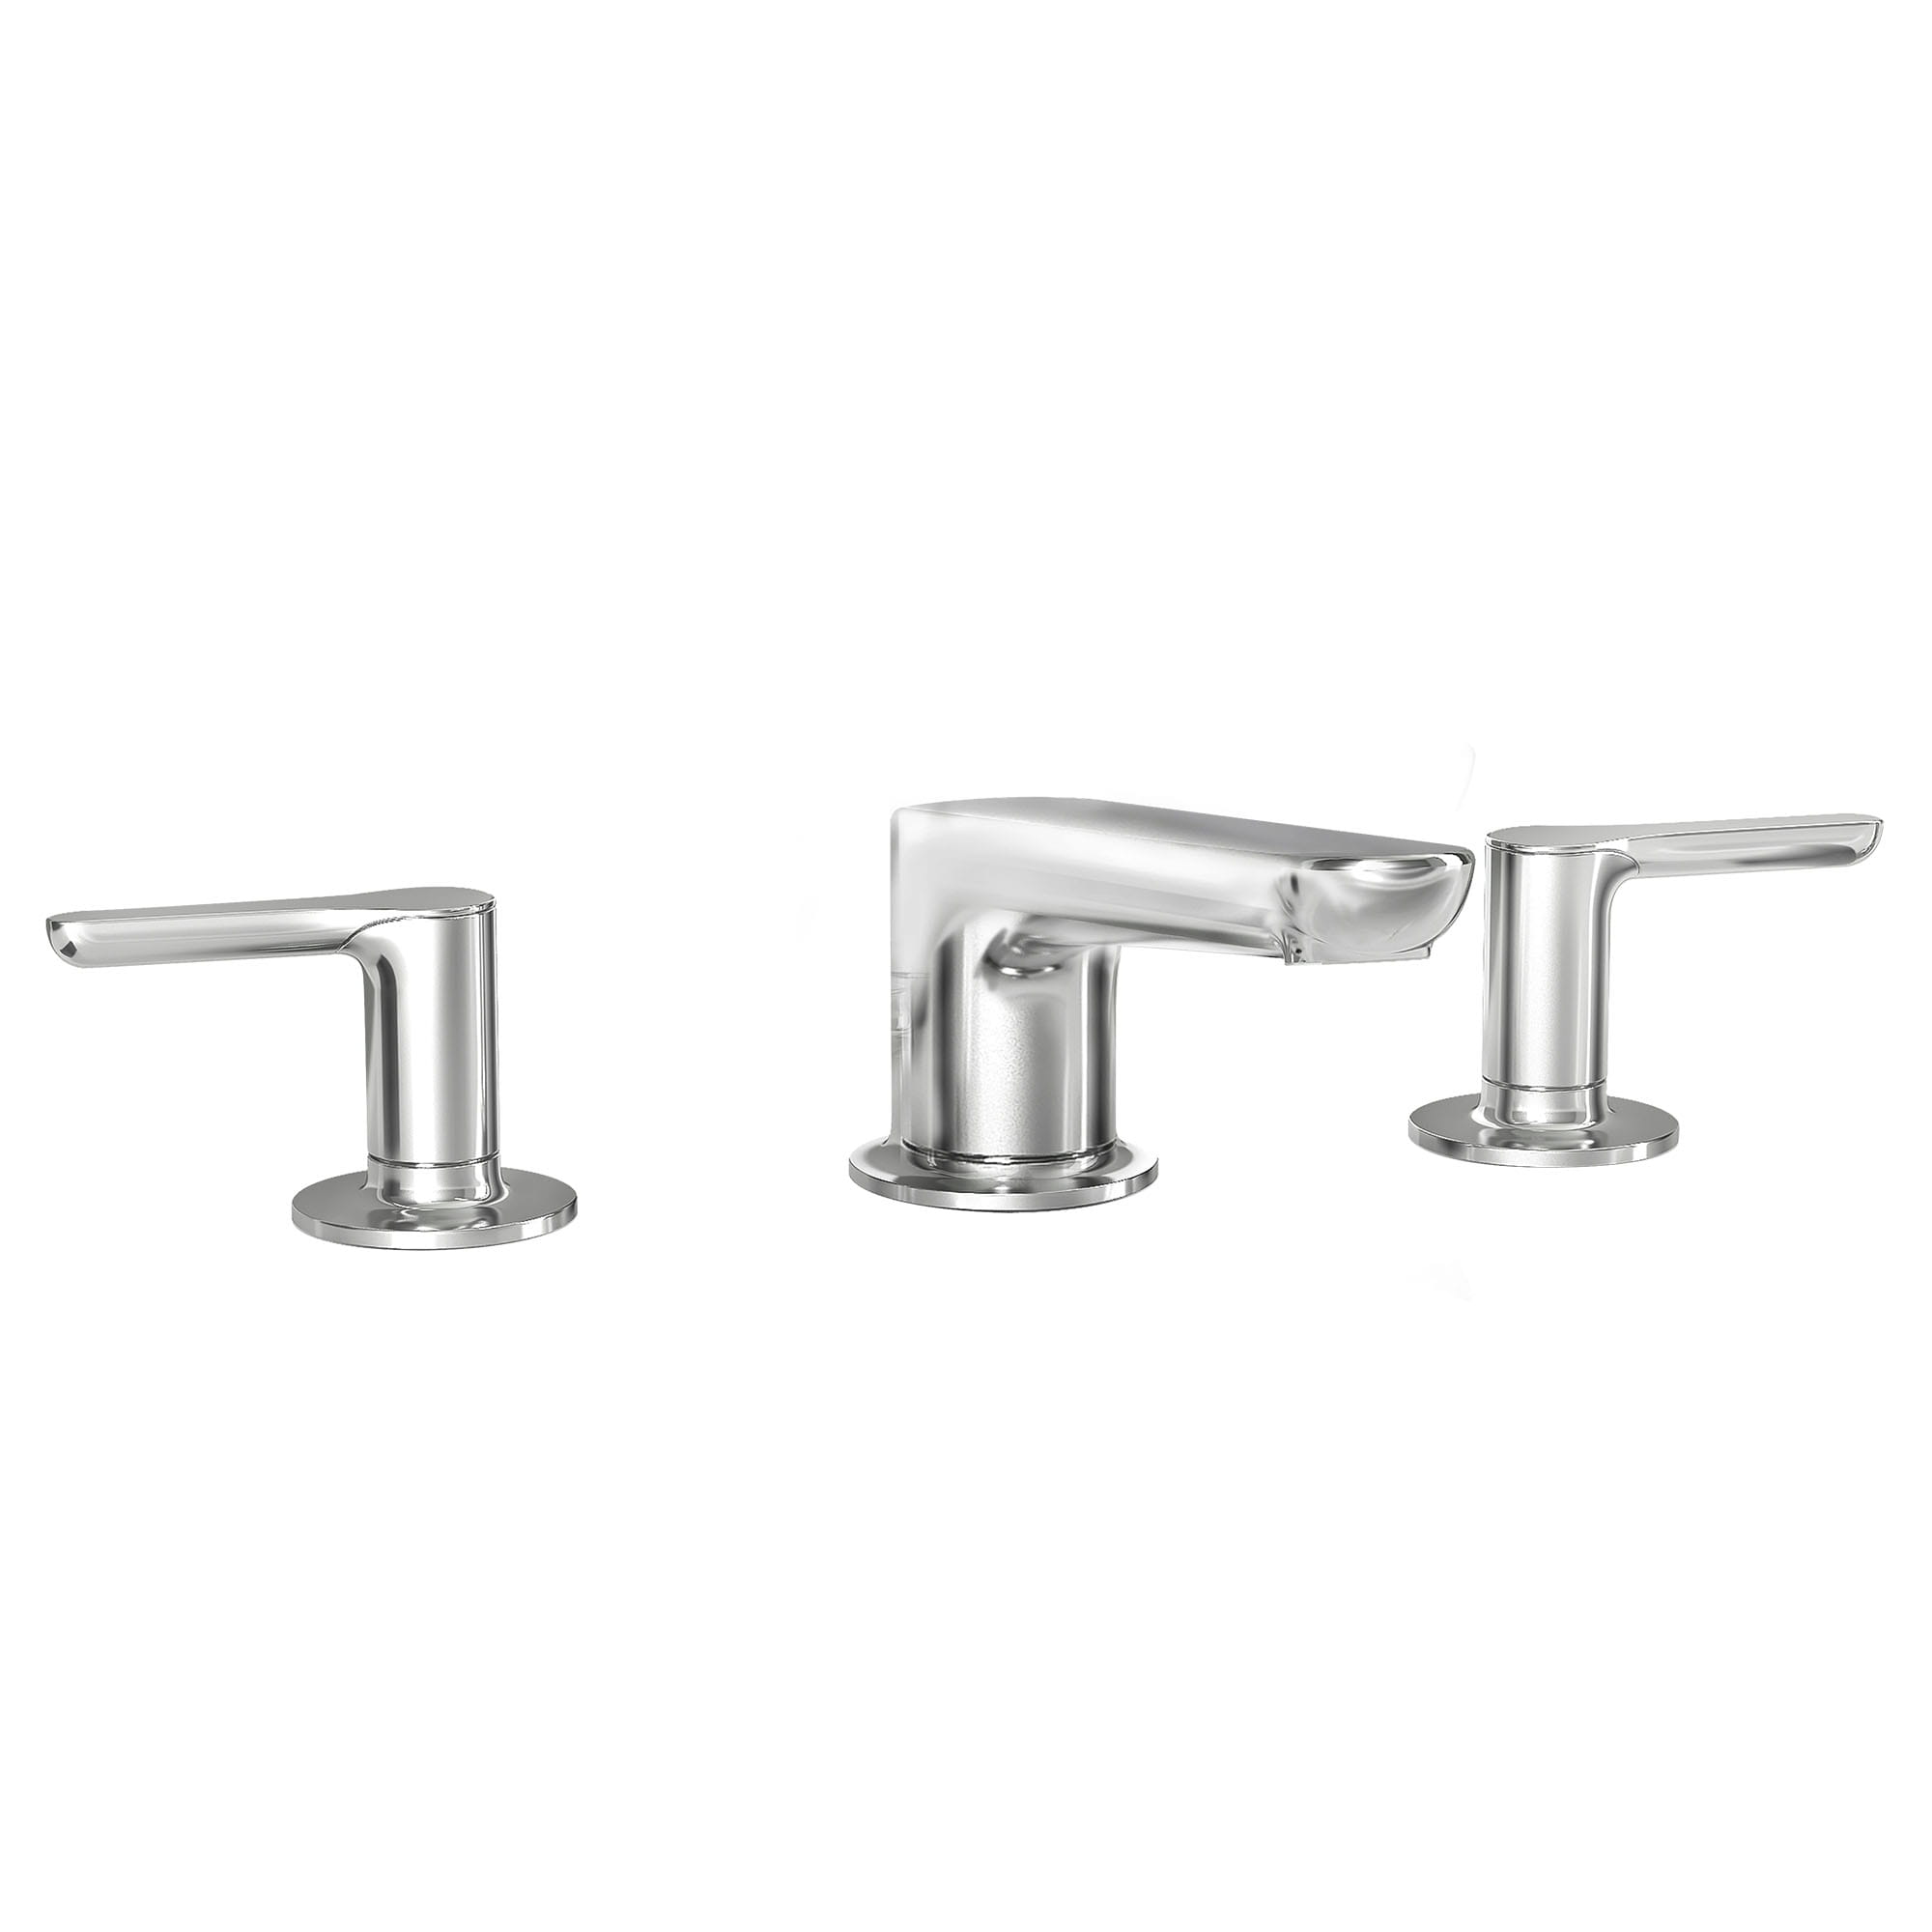 Studio® S Widespread Low Spout Lever Handles 1.2 gpm/4.5 L/min With Lever Handles